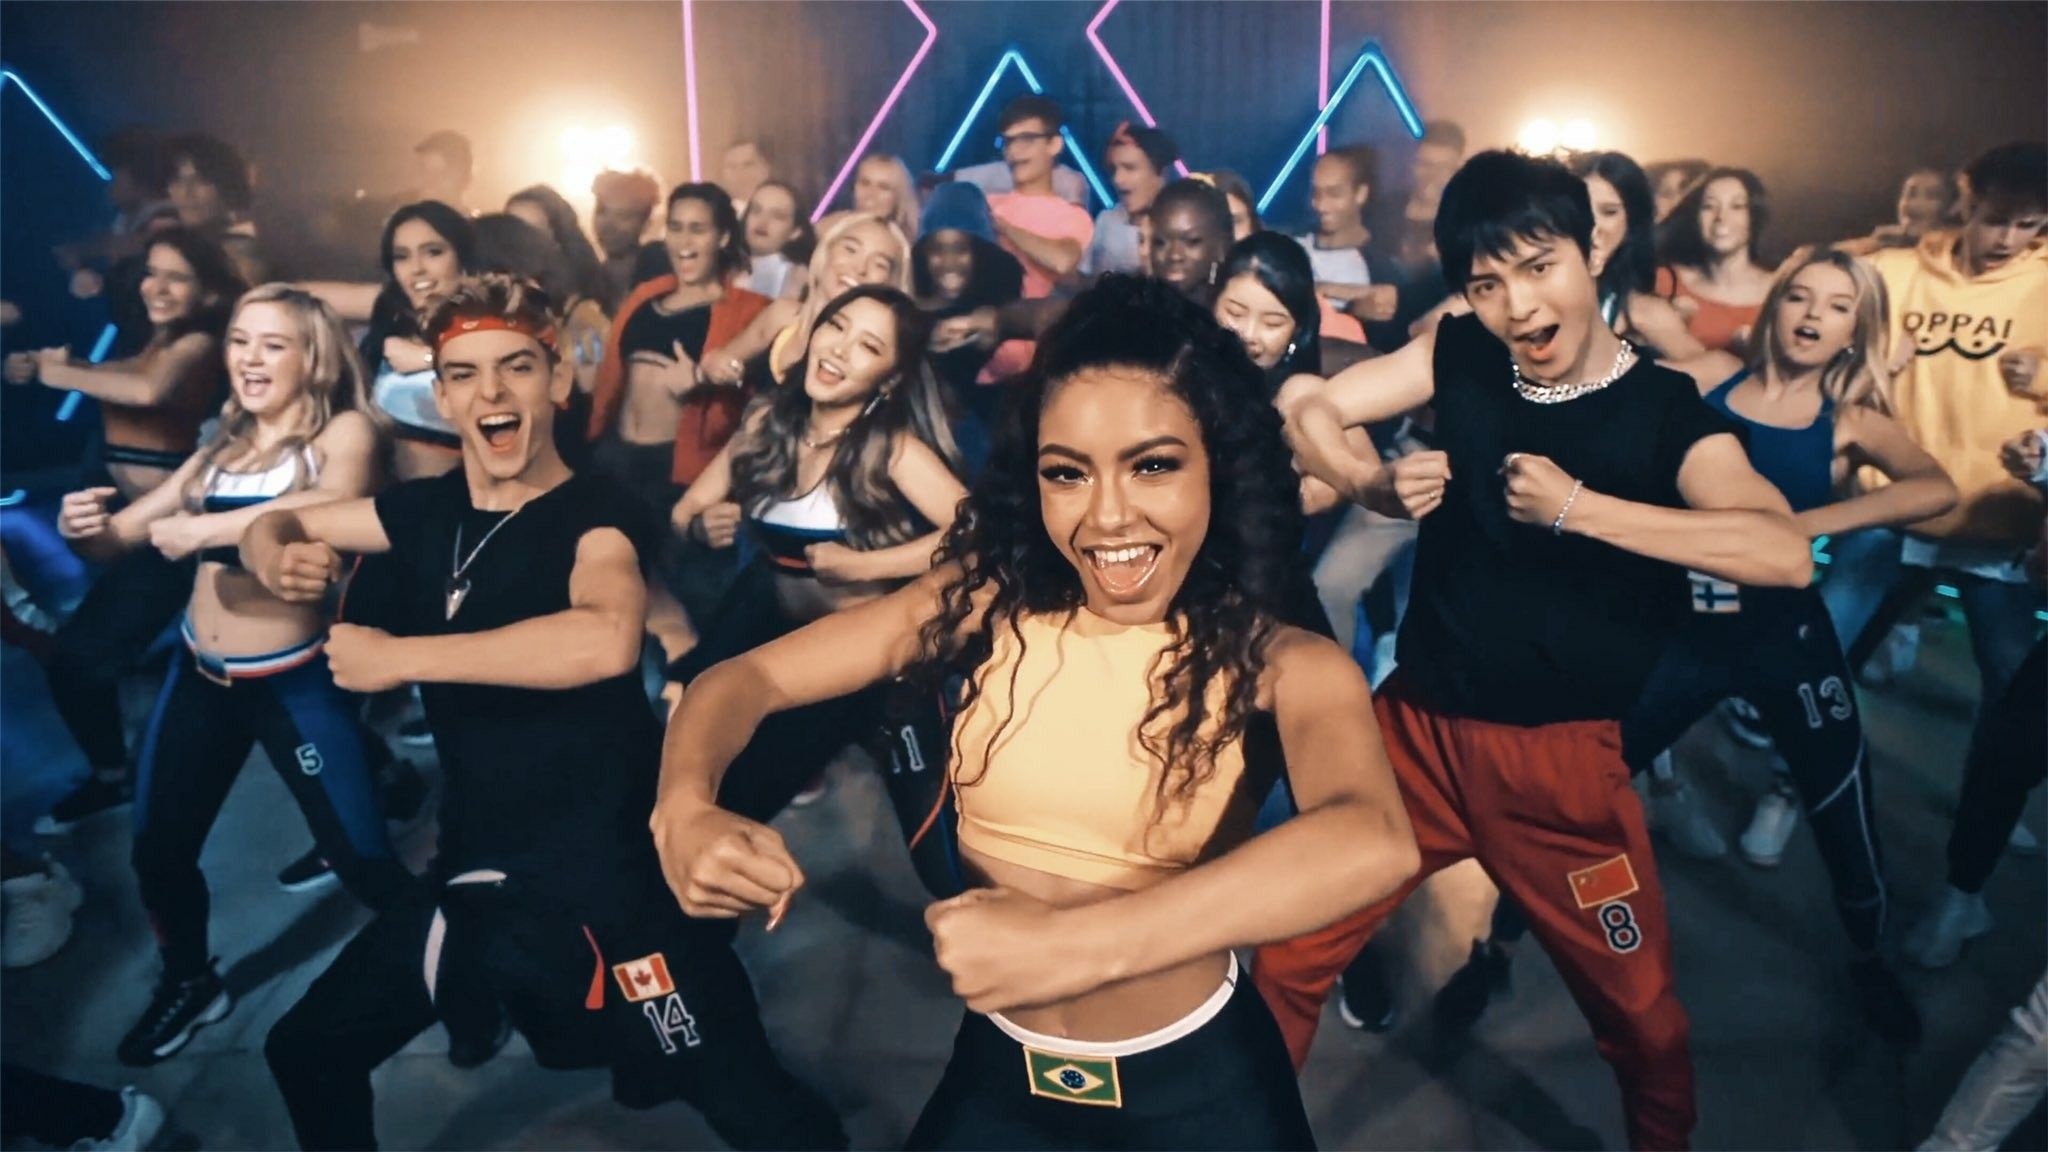 Now United (Pop group)